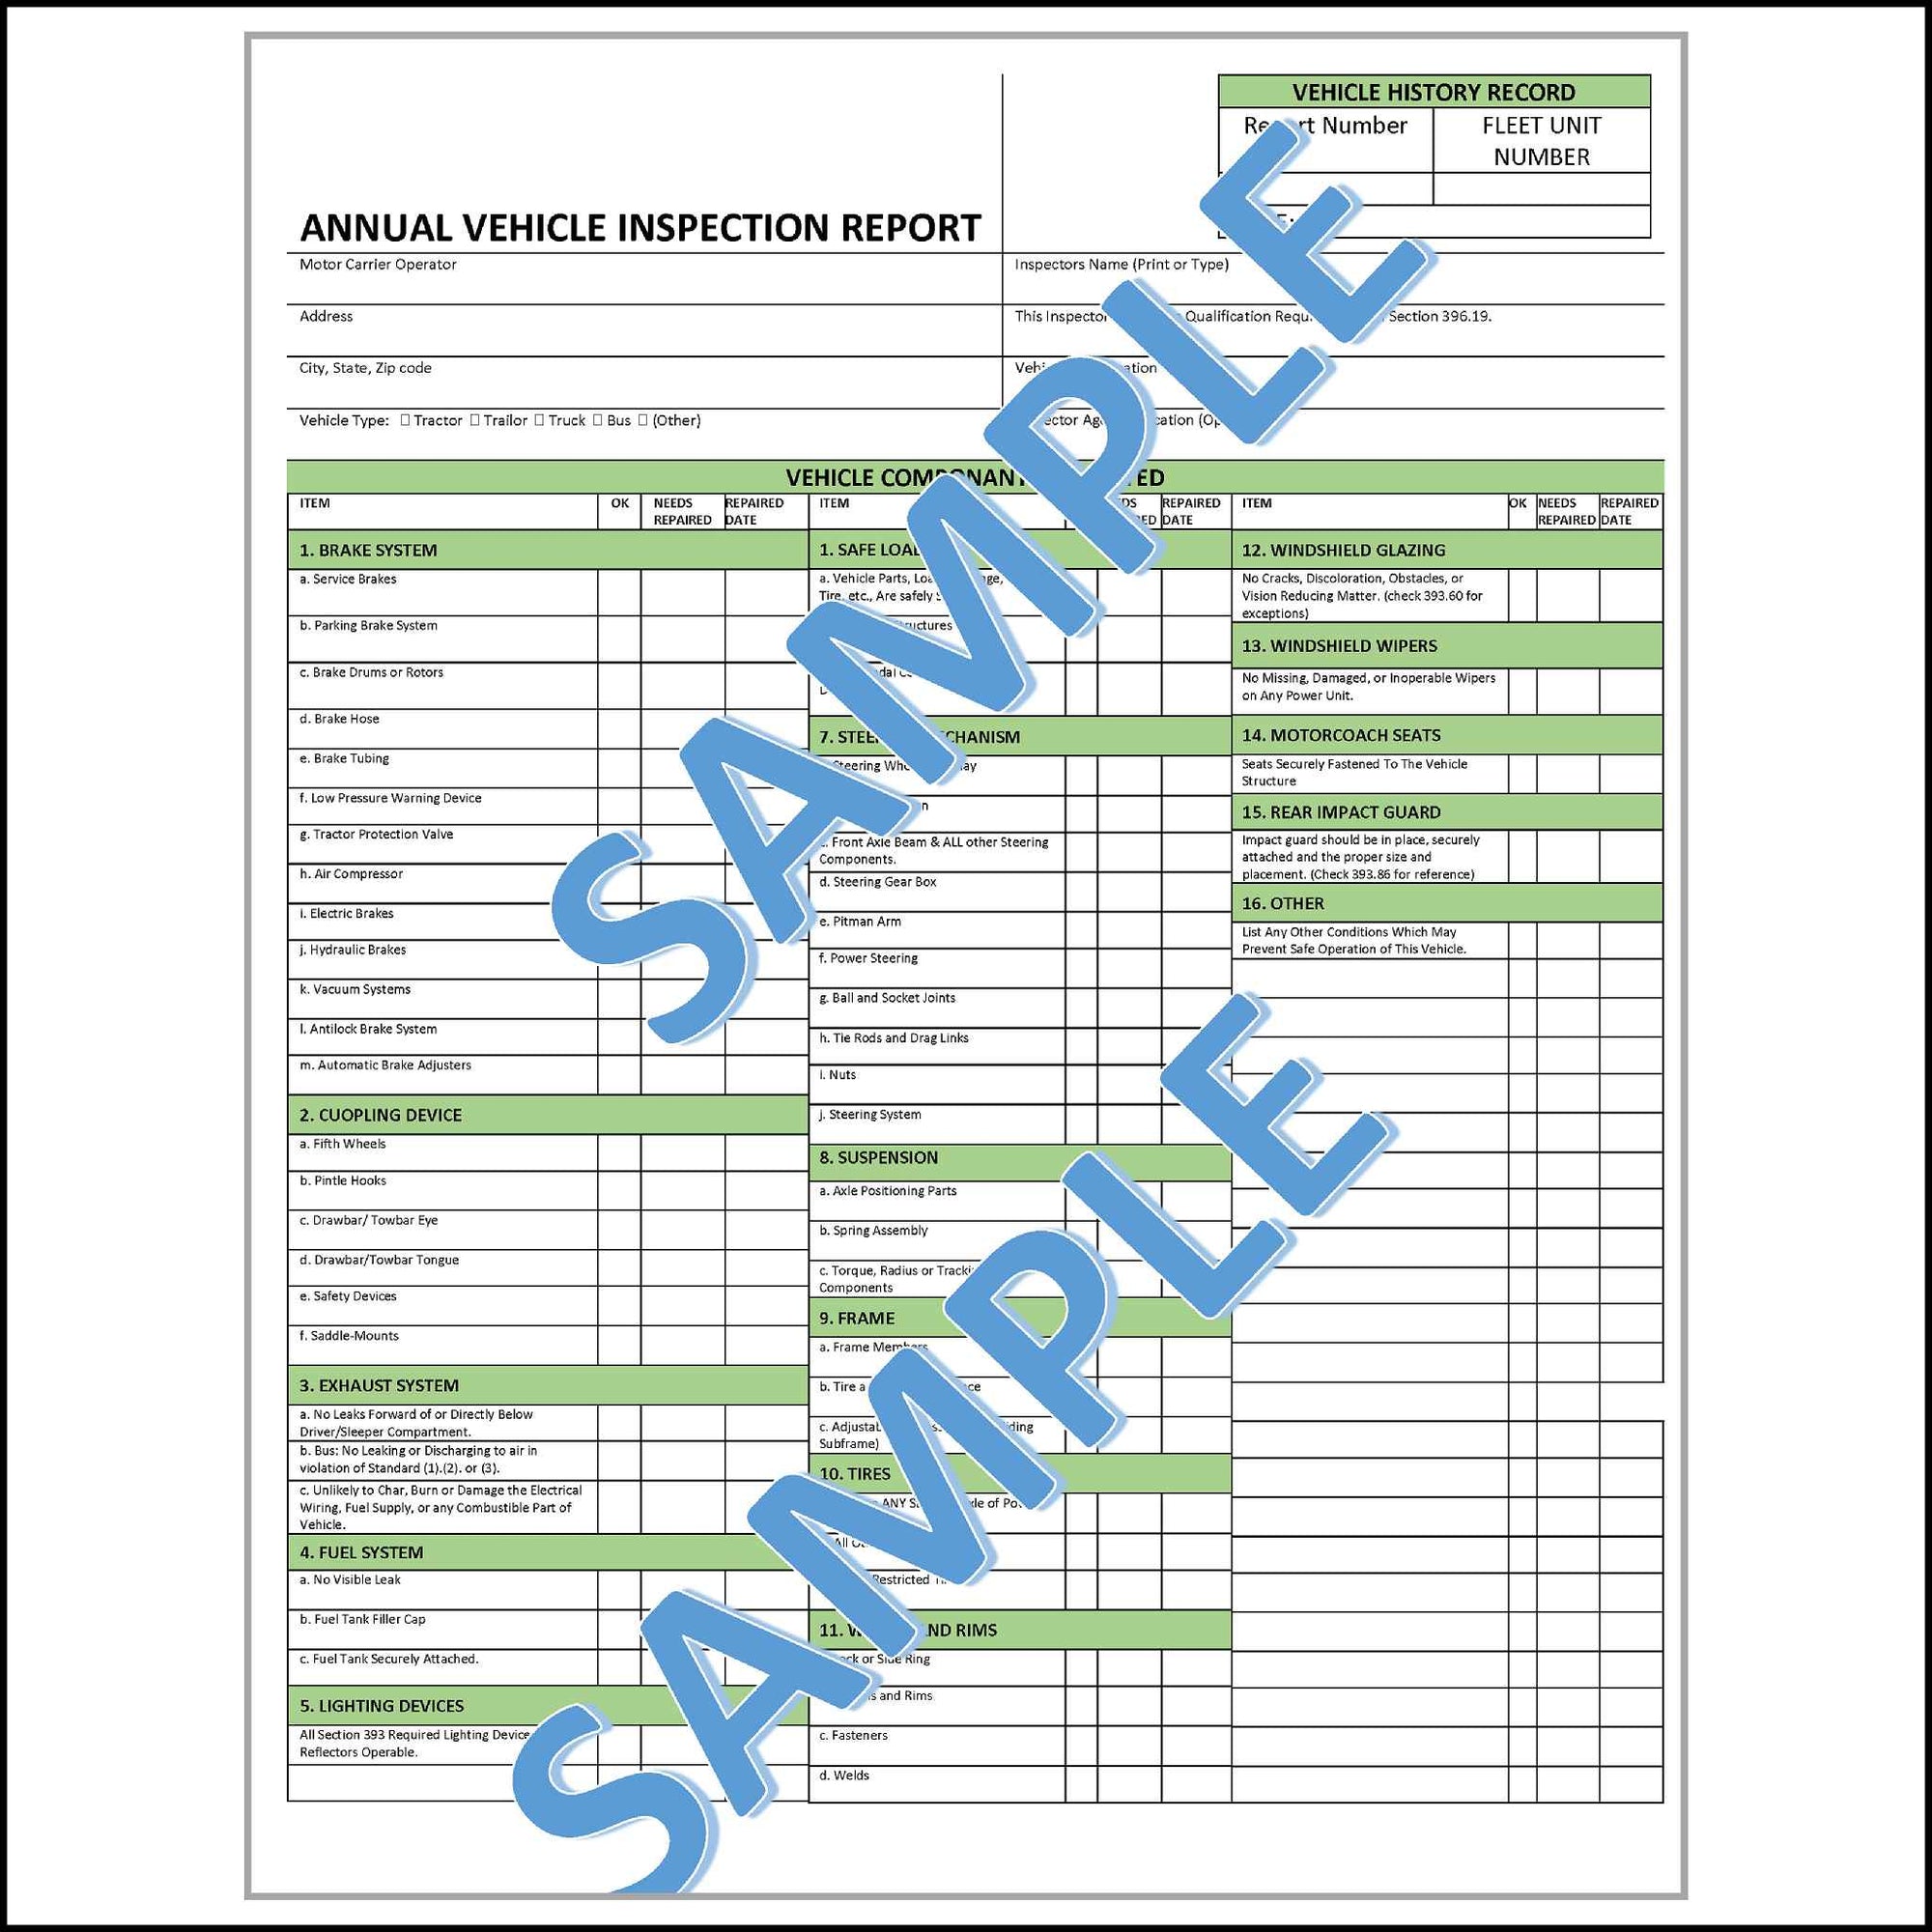 Annual 396.19 Vehicle Inspection Report Three Copy Form.